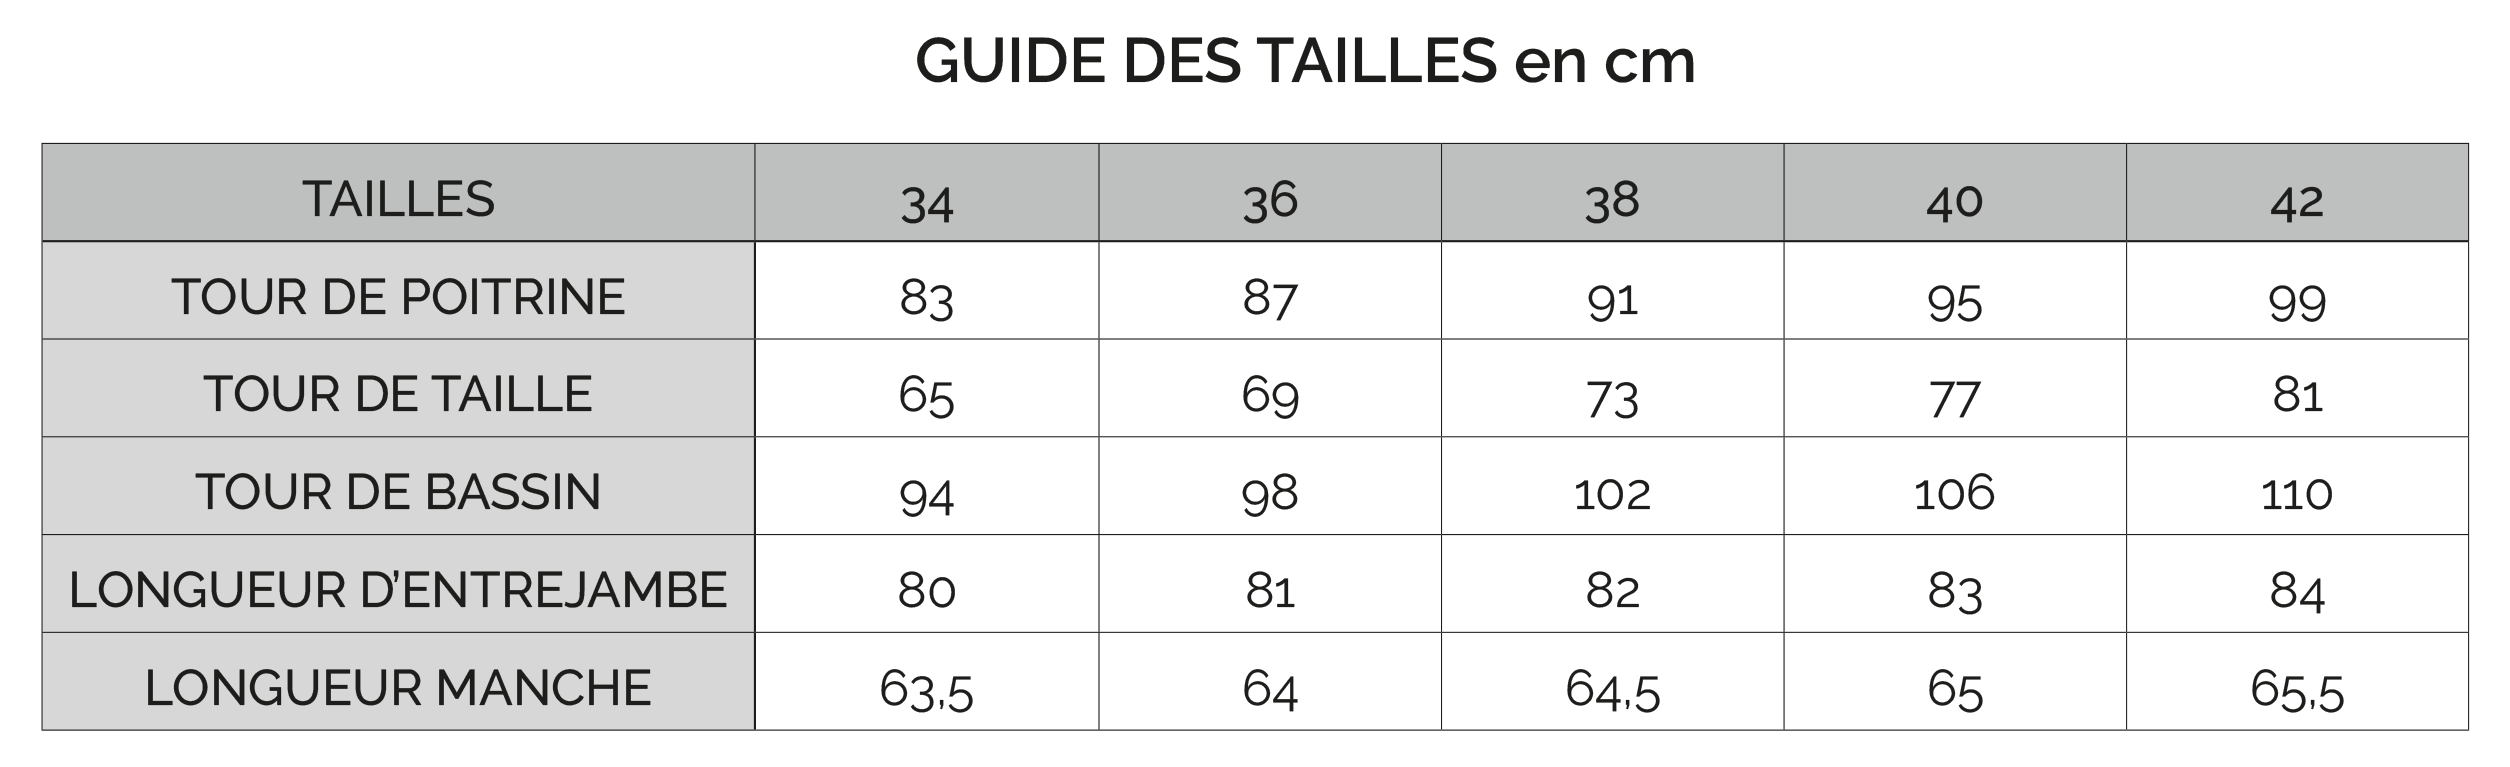 guide%20tailles.png